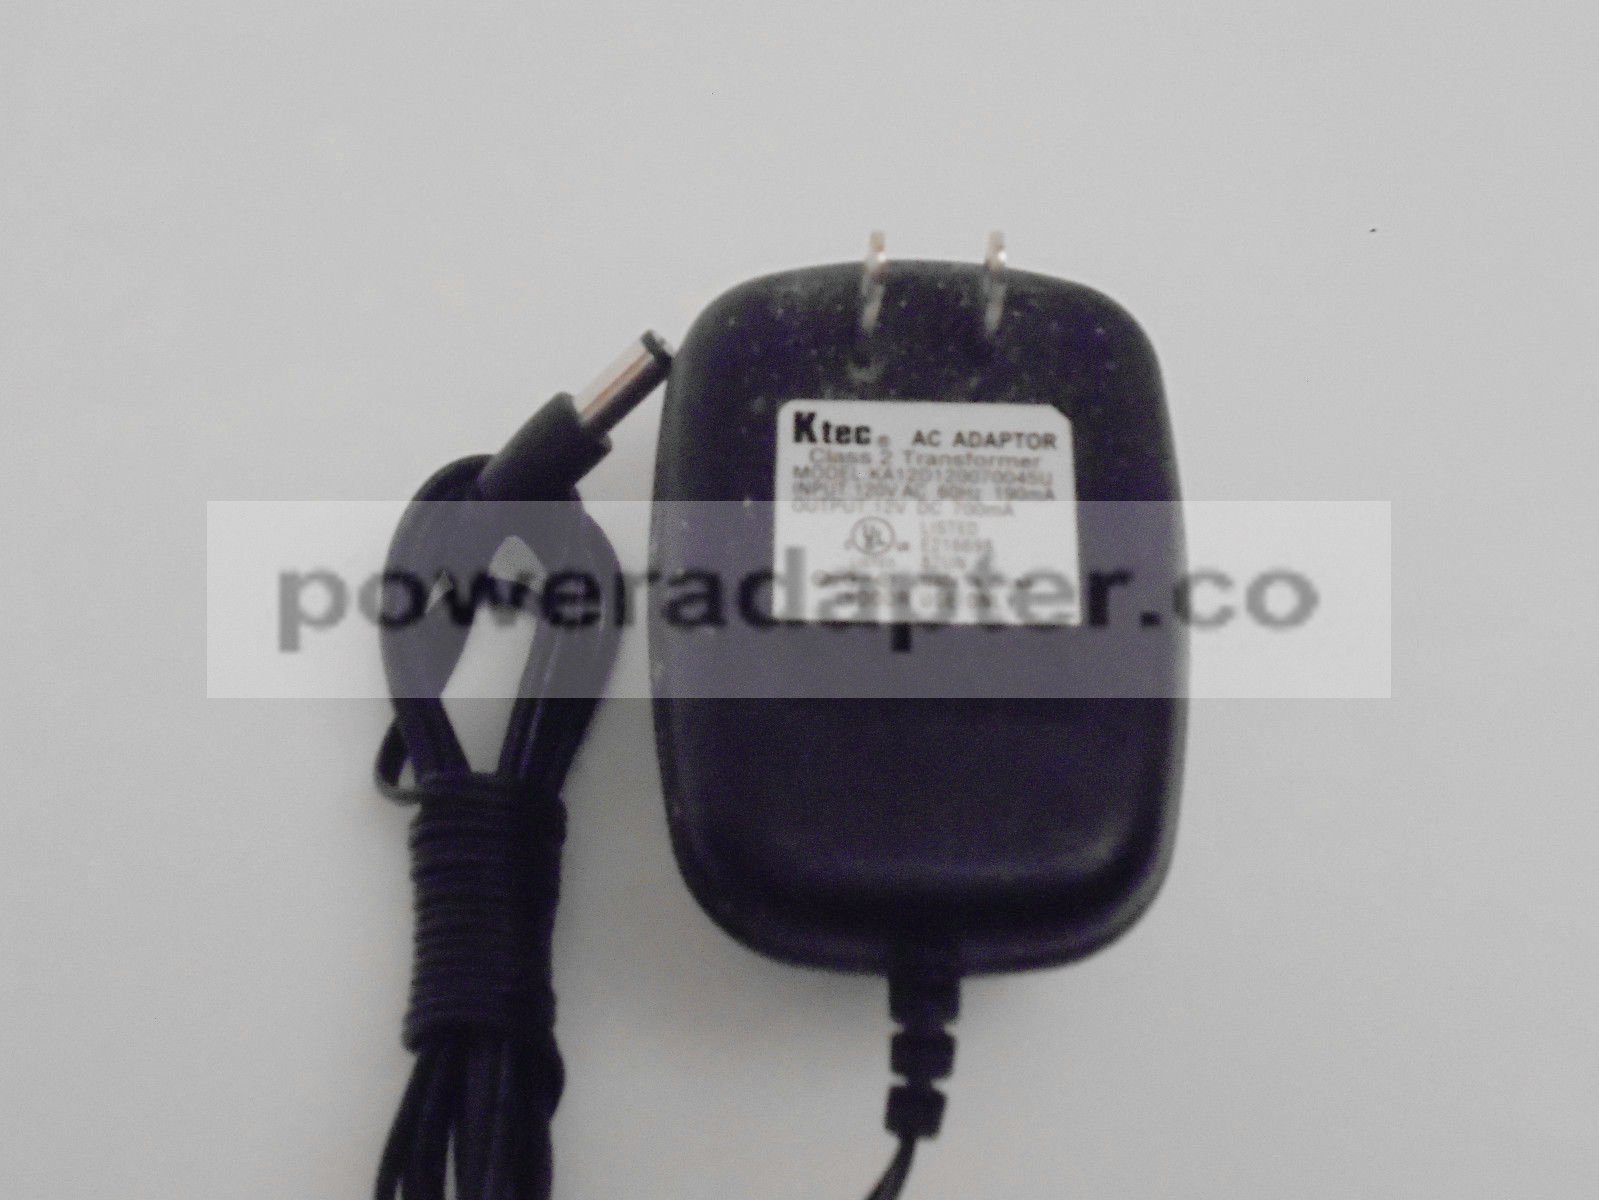 Ktec KA12D120020070045U AC Power Supply Adaptor Condition: Used: An item that has been used previously. The item may